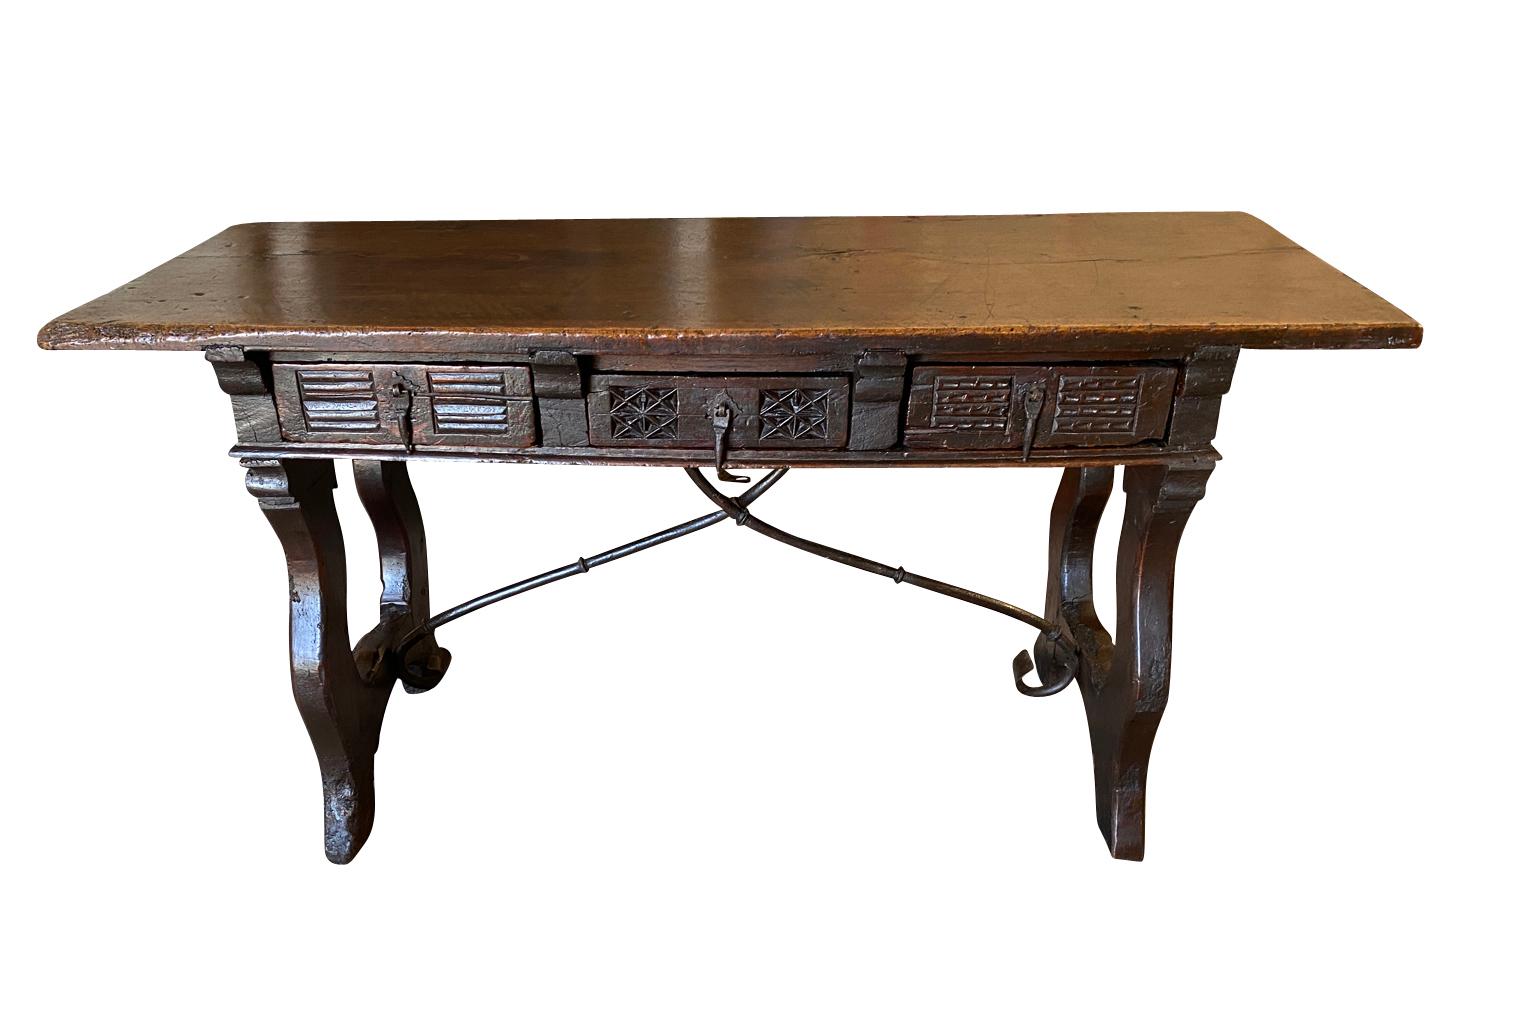 A very handsome 17th century Console Table - Writing Table from the Catalan region of Spain.  Beautifully constructed from walnut with a solid board top, 3 drawers with unique fascia carvings, hand forged iron stretchers and lyre shaped legs. 